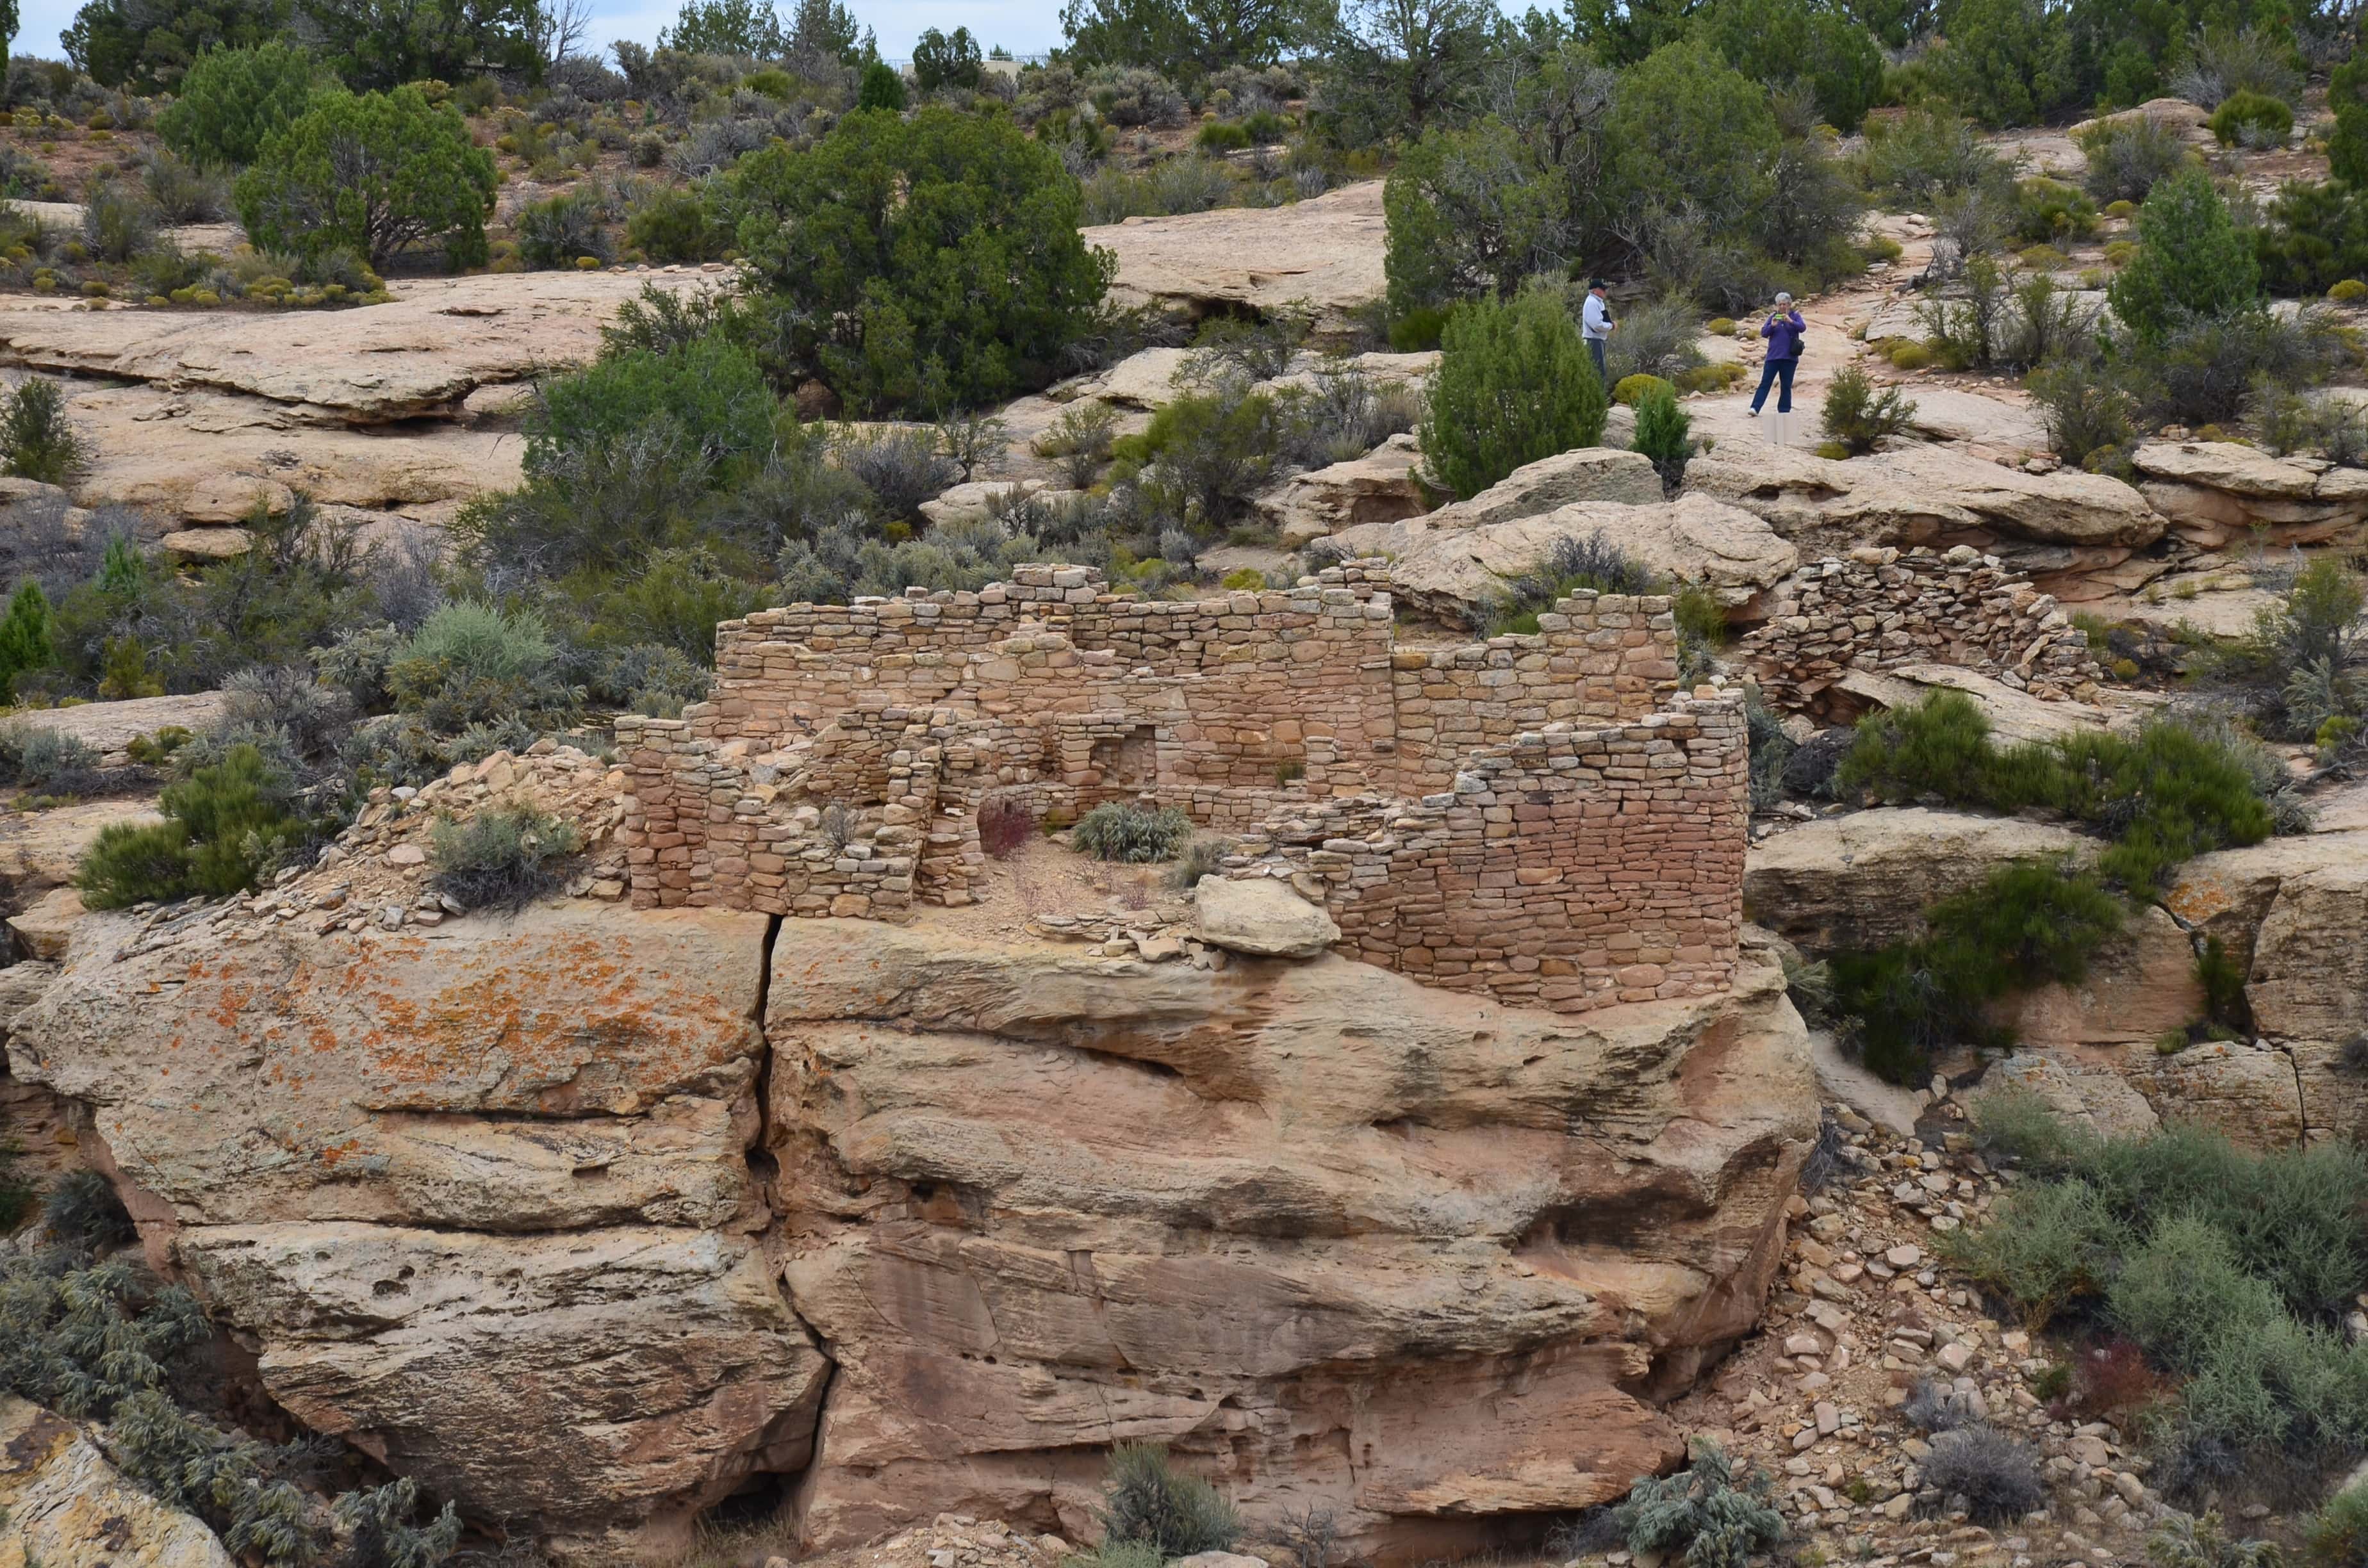 Unit Type House at Hovenweep National Monument in Utah